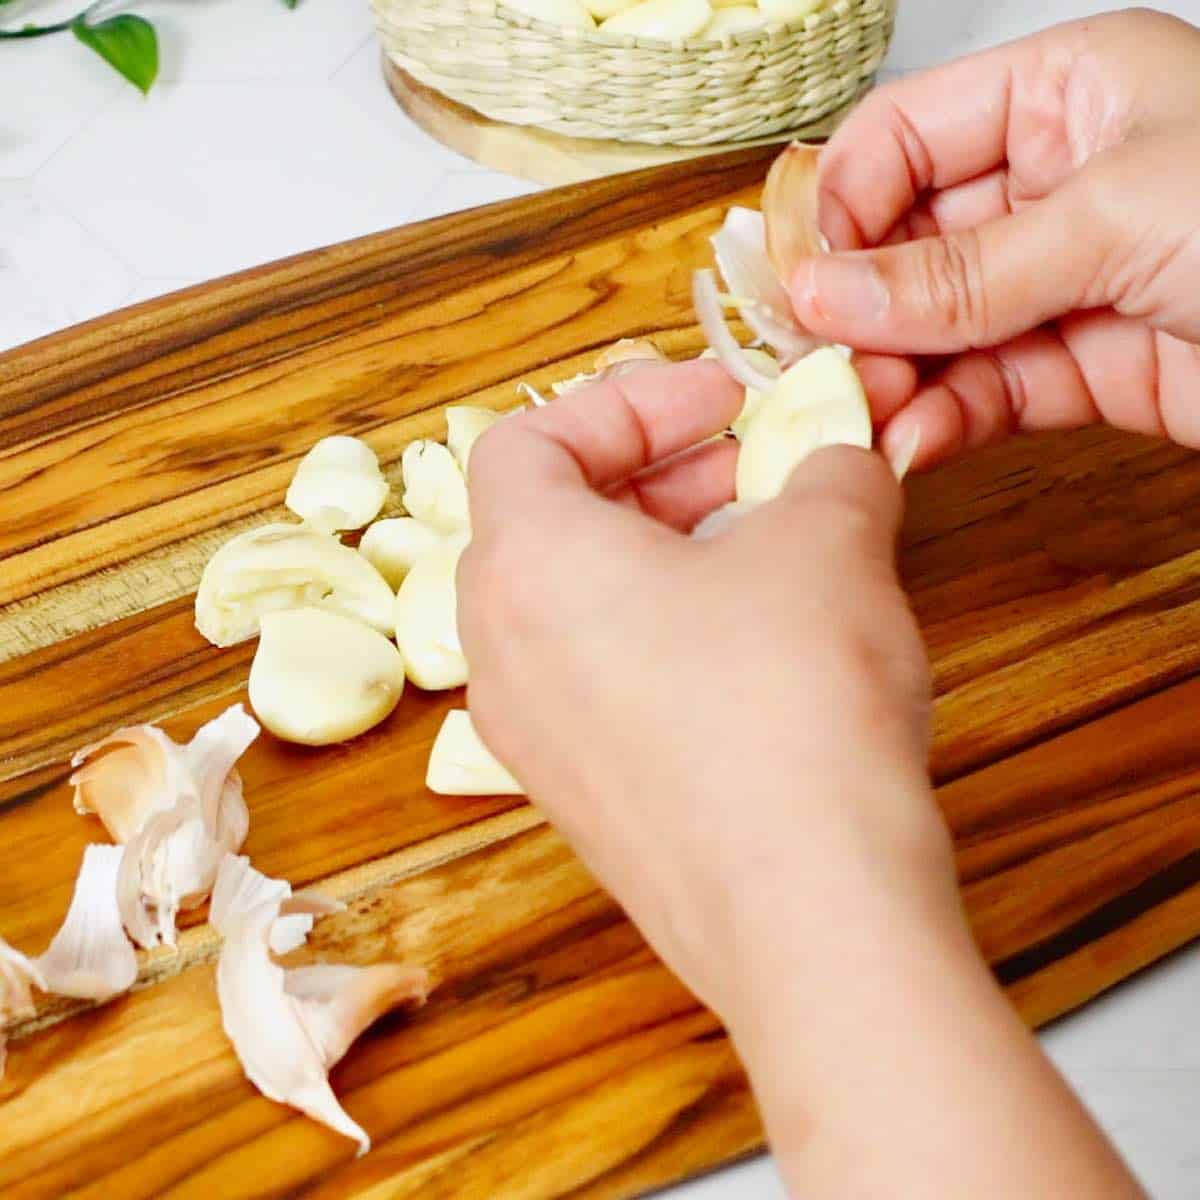 Removing peel from the crushed garlic cloves.